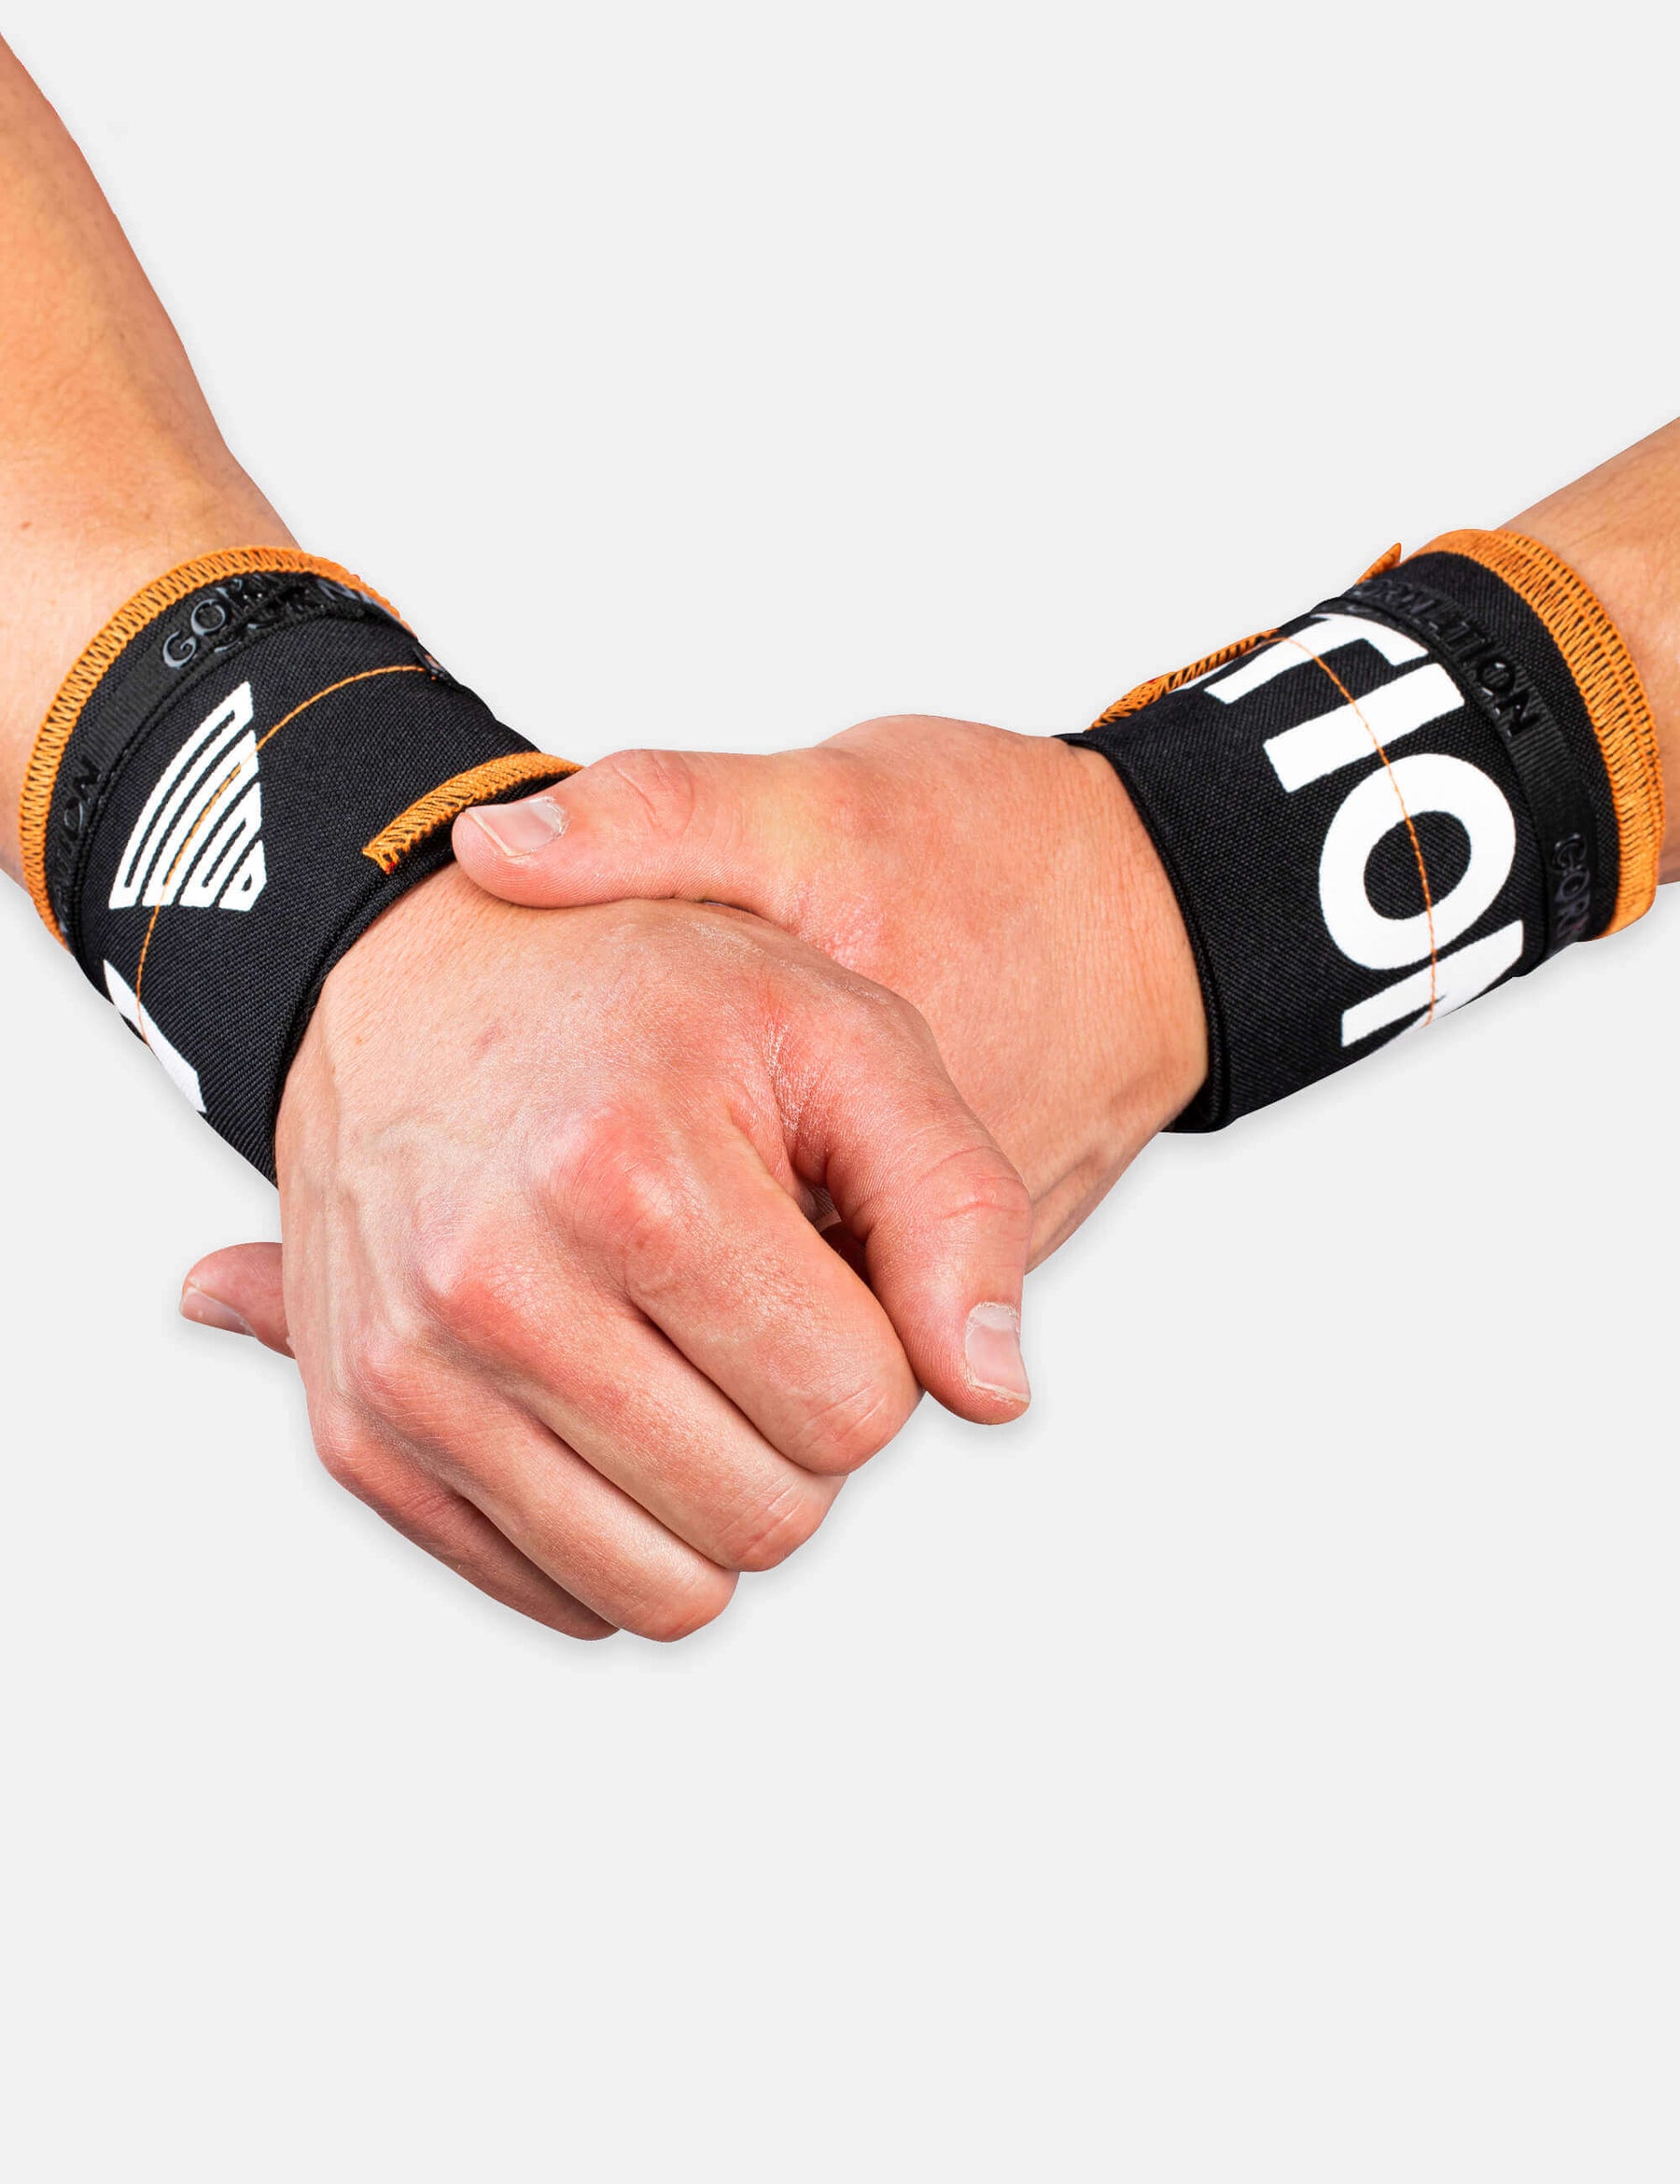 Black Orange Gornation Wrist wraps with tight fit, adjustable wristband for wrist support and injury prevention